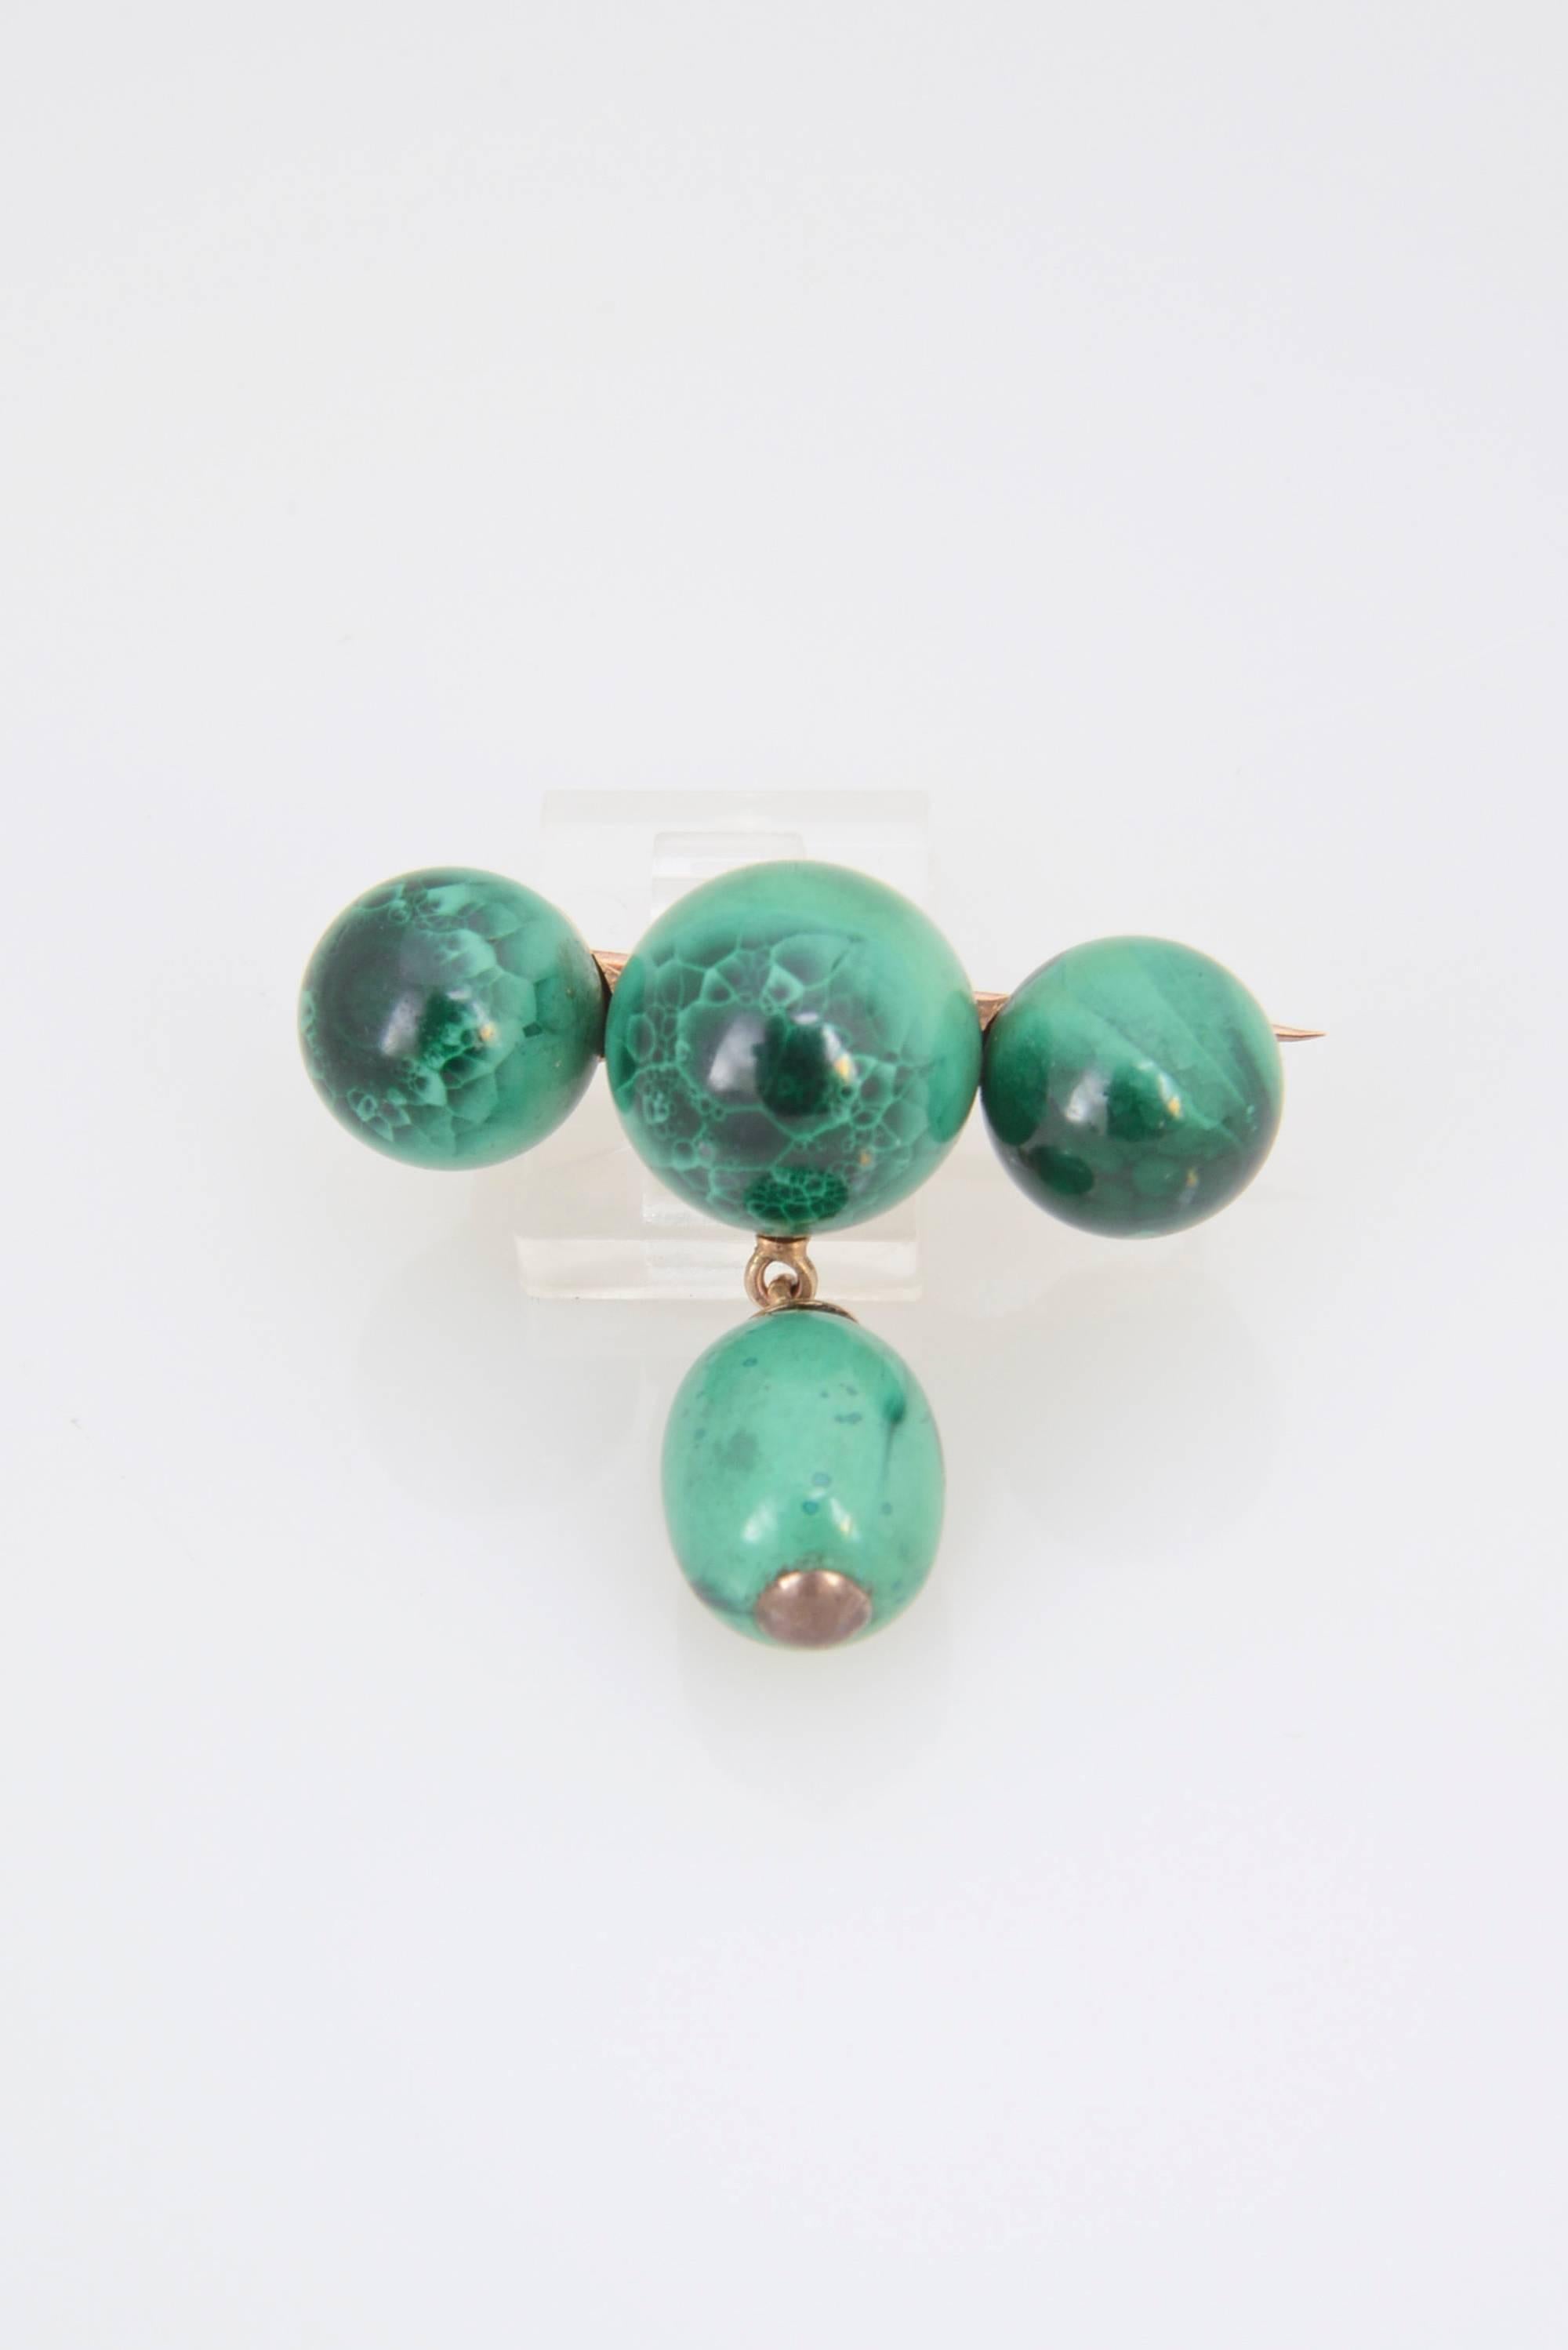 Antique Victorian brooch with malachite set in 14K gold.